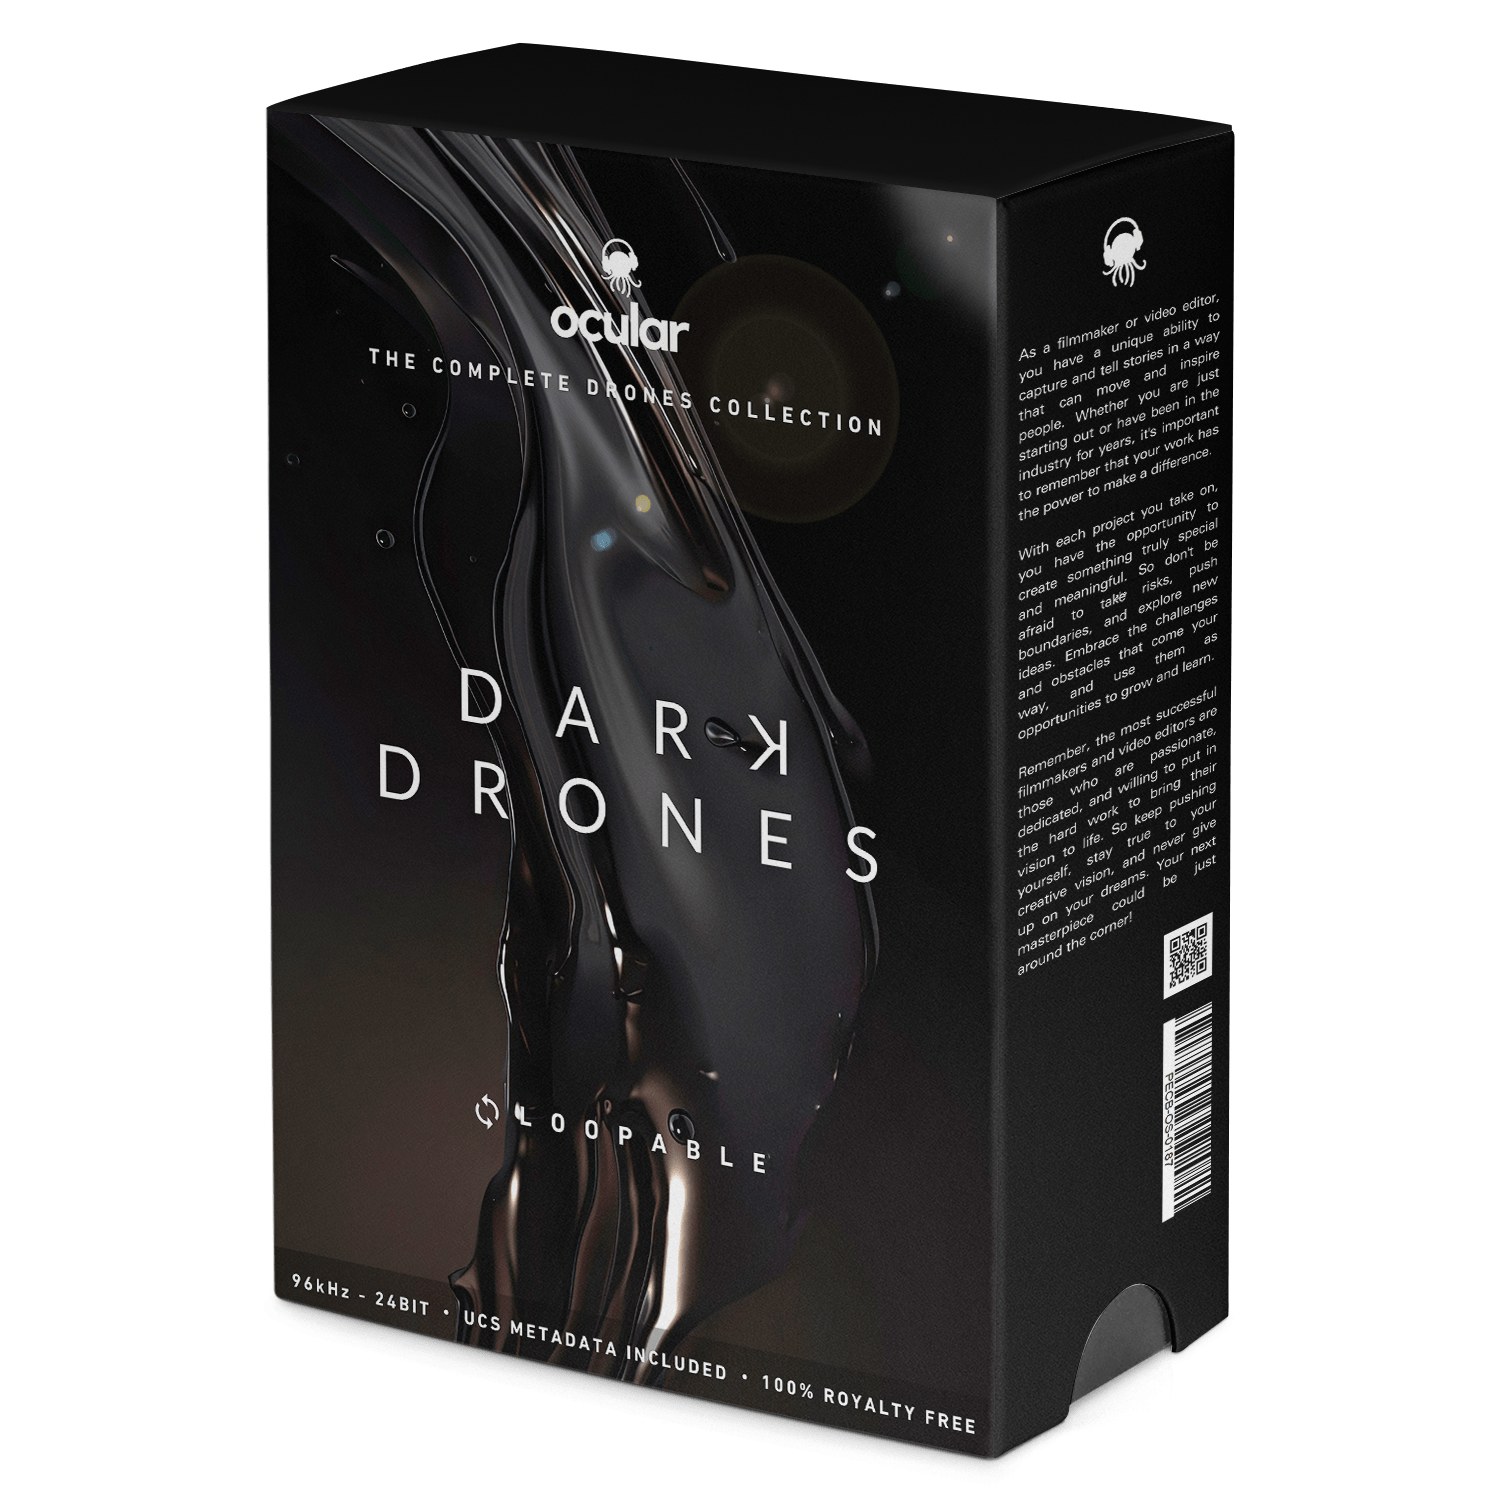 Dark Drones Sound Effects for Video Editing. Professional Sound FX Library.